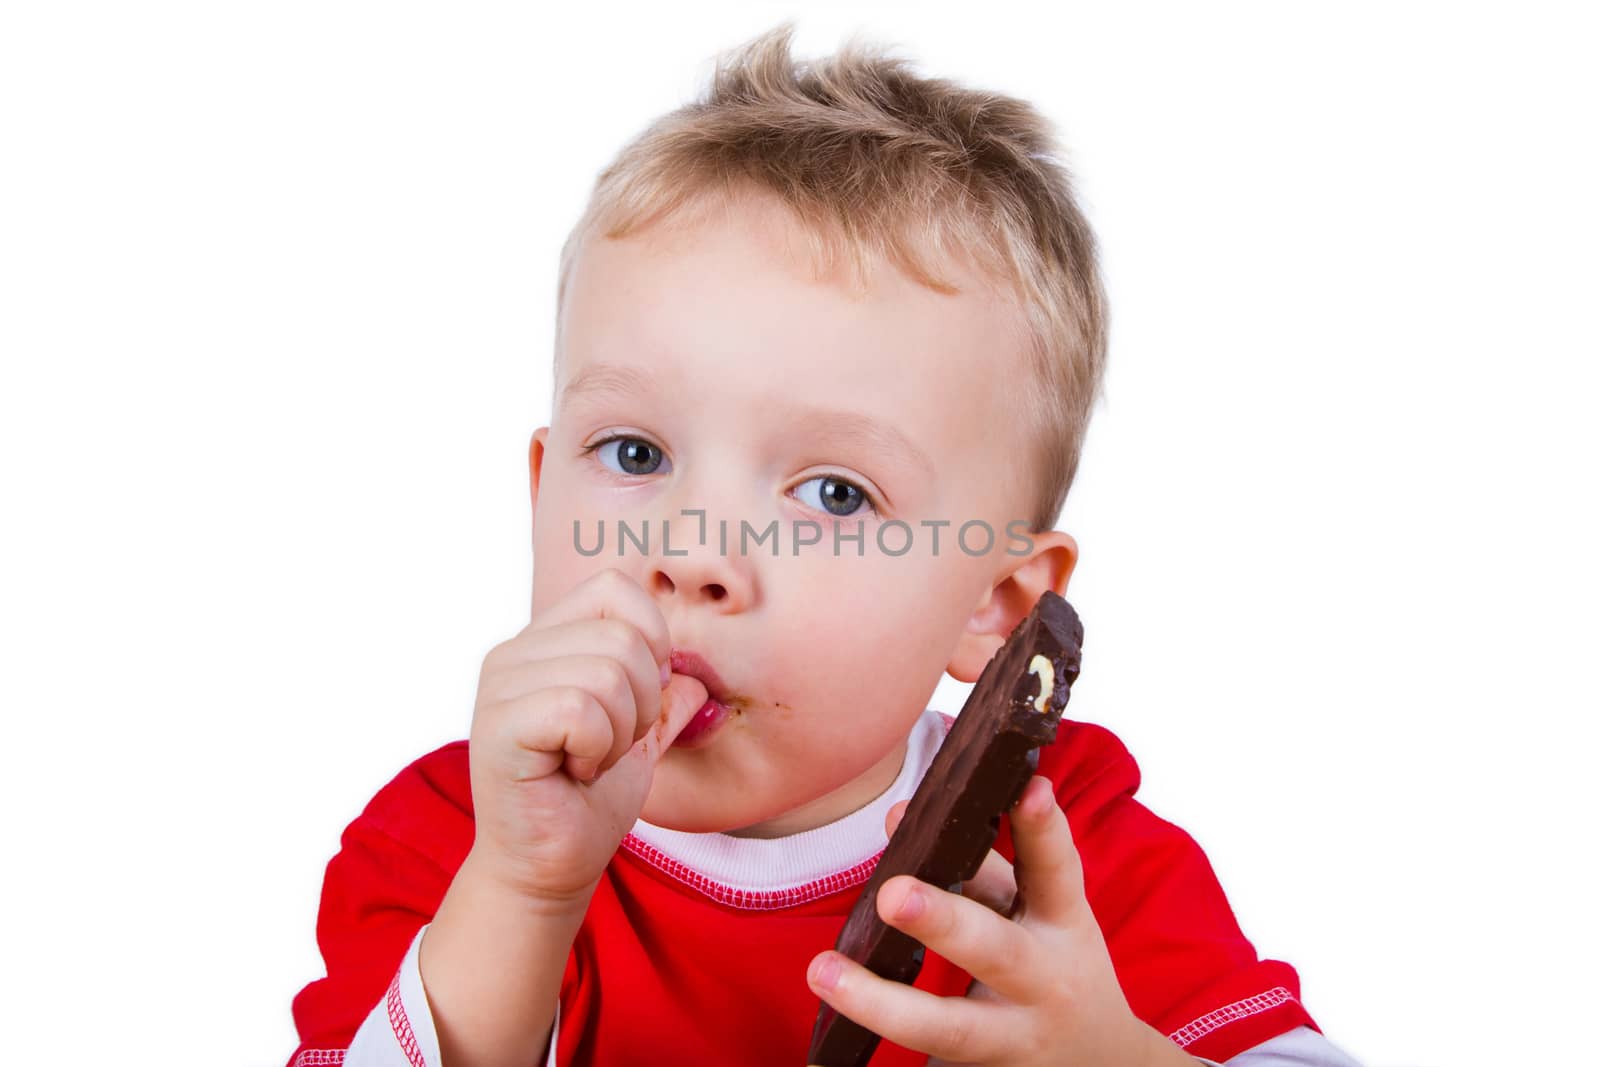 A small boy in red shirt eating whole bar of chocolate. Isolated on white background
